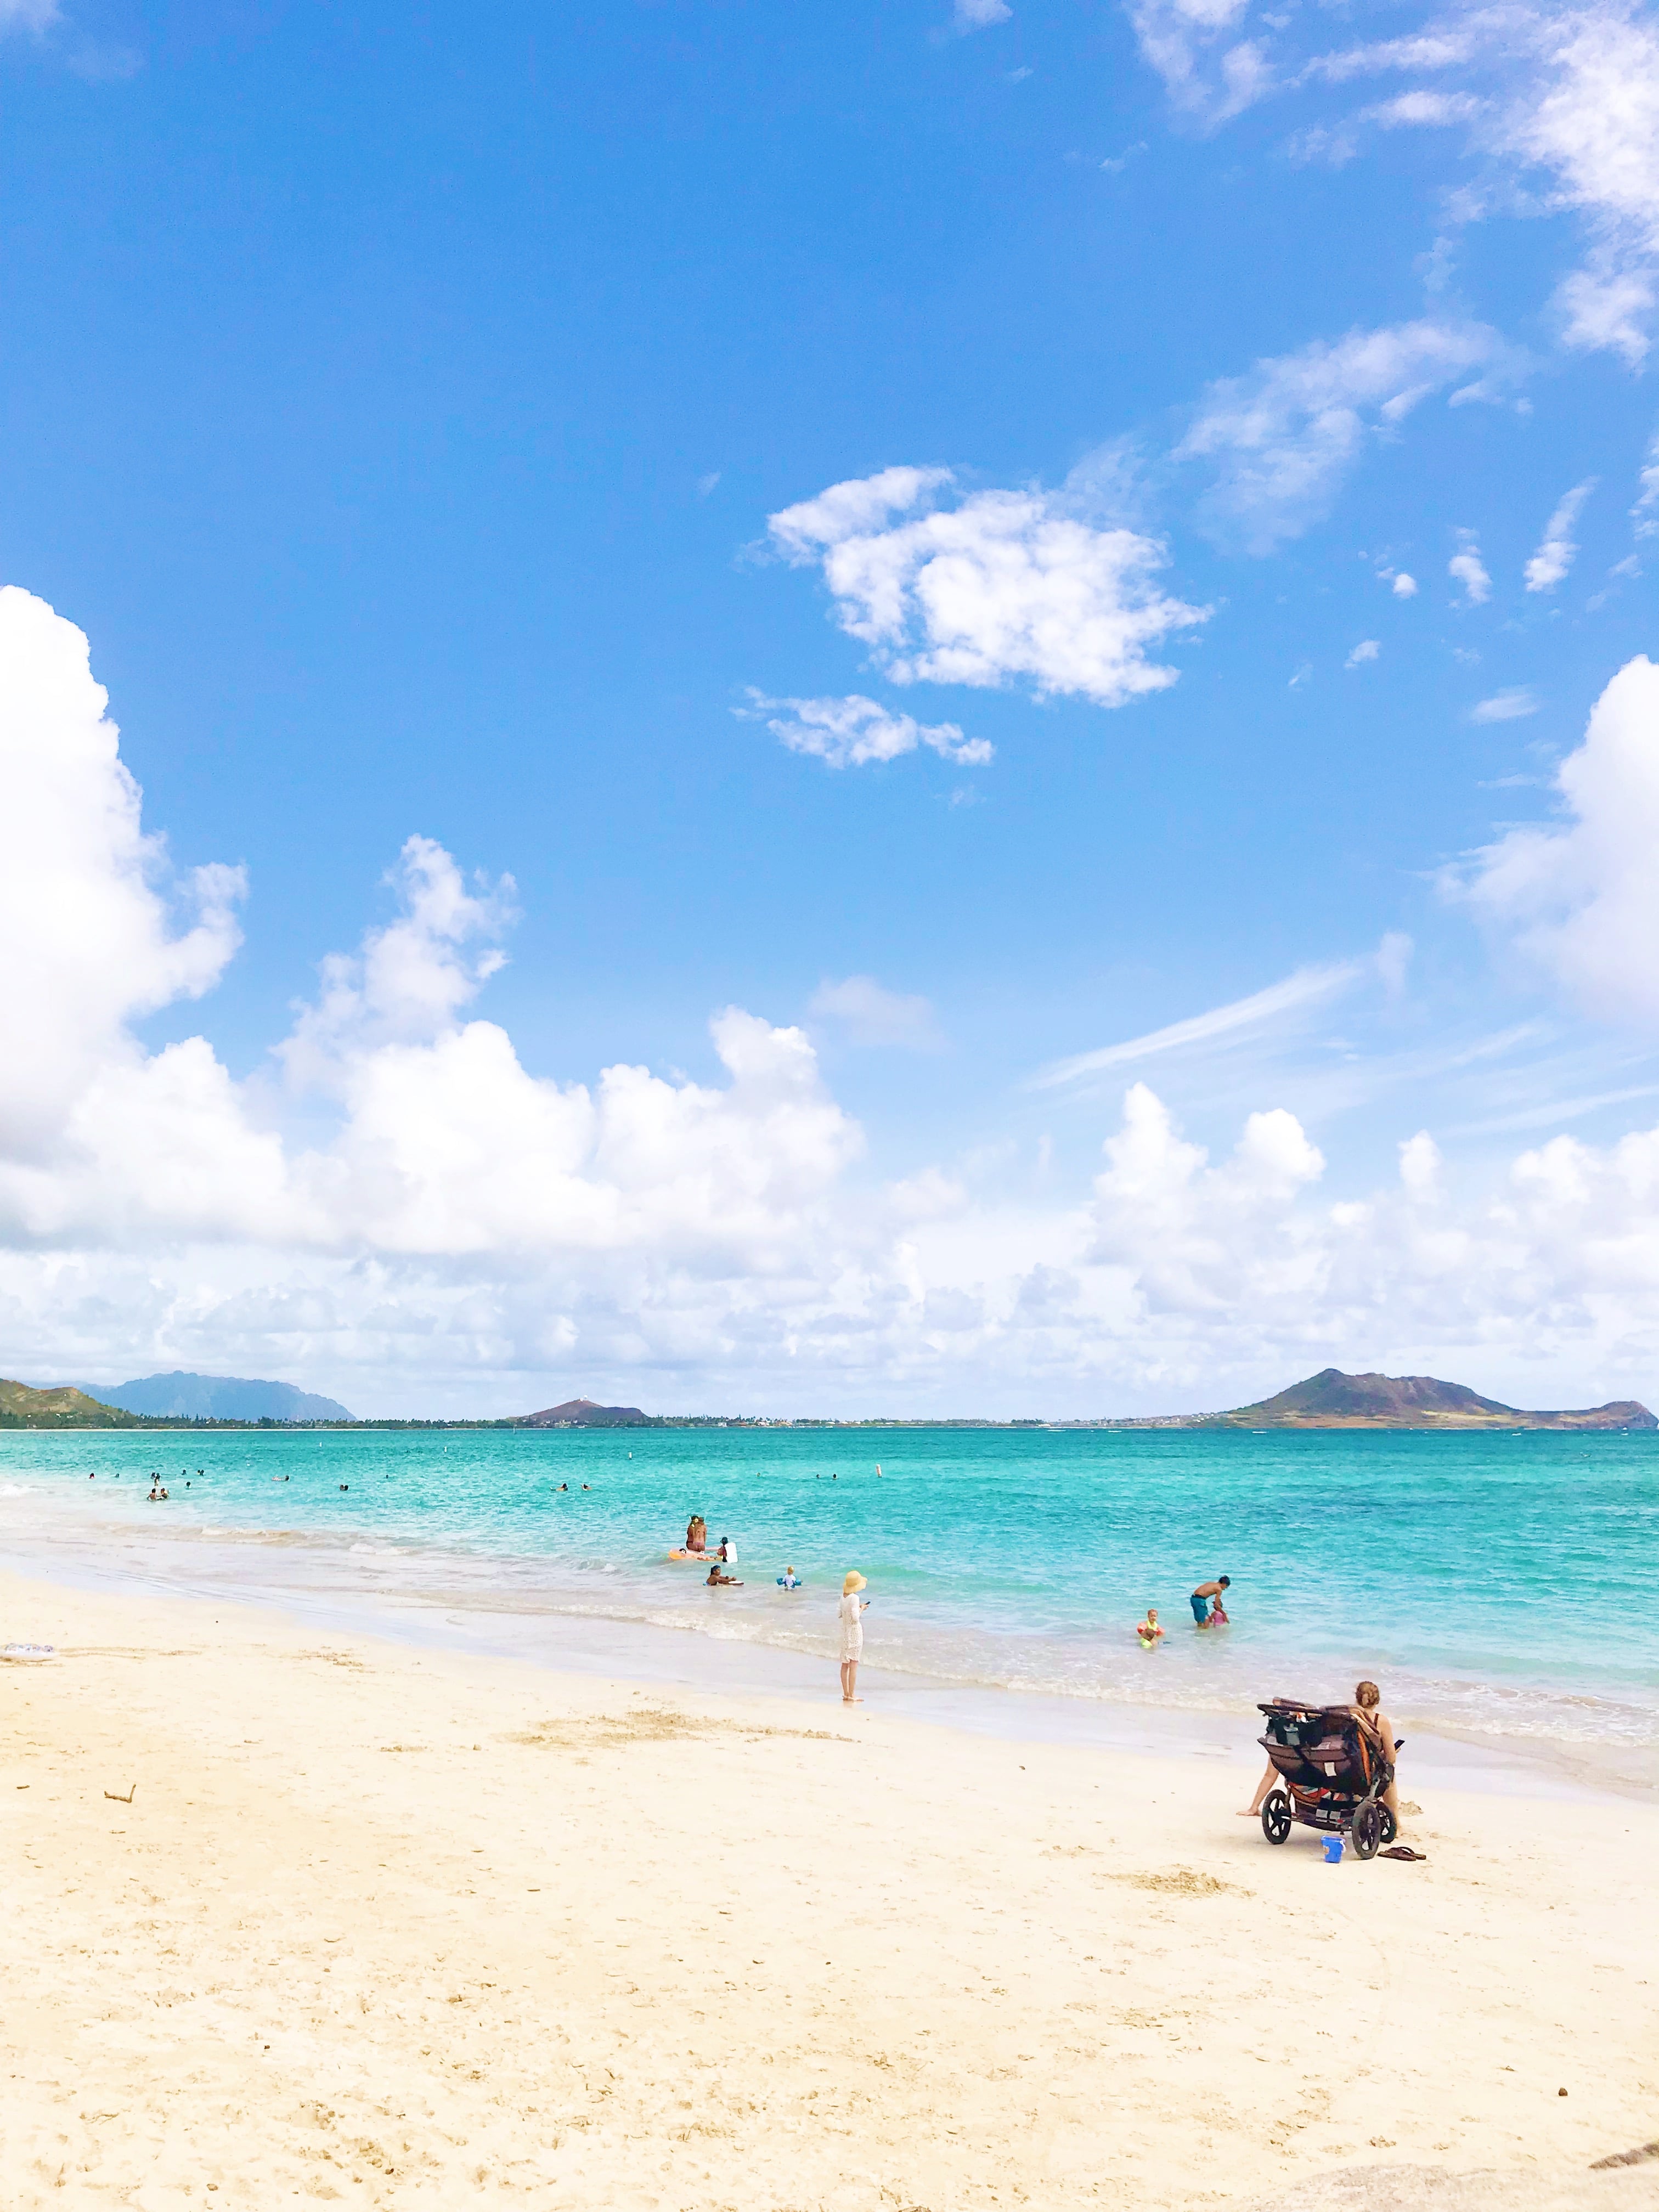 HOW TO SPEND A WEEKEND IN KAILUA | What to see, eat do and enjoy while on Oahu's east side in the beautiful beach town of Kailua! - Kailua Oahu Hawaii - Kailua Beach - Kailua Town - Kailua Weather - Kailua Restaurants - Kailua Shops - Weekend on Oahu - Oahu Travel Guide - Oahu Travel Blog - HomeAway Rentals In Kailua - #oahu #hawaii #travelblog #kailua